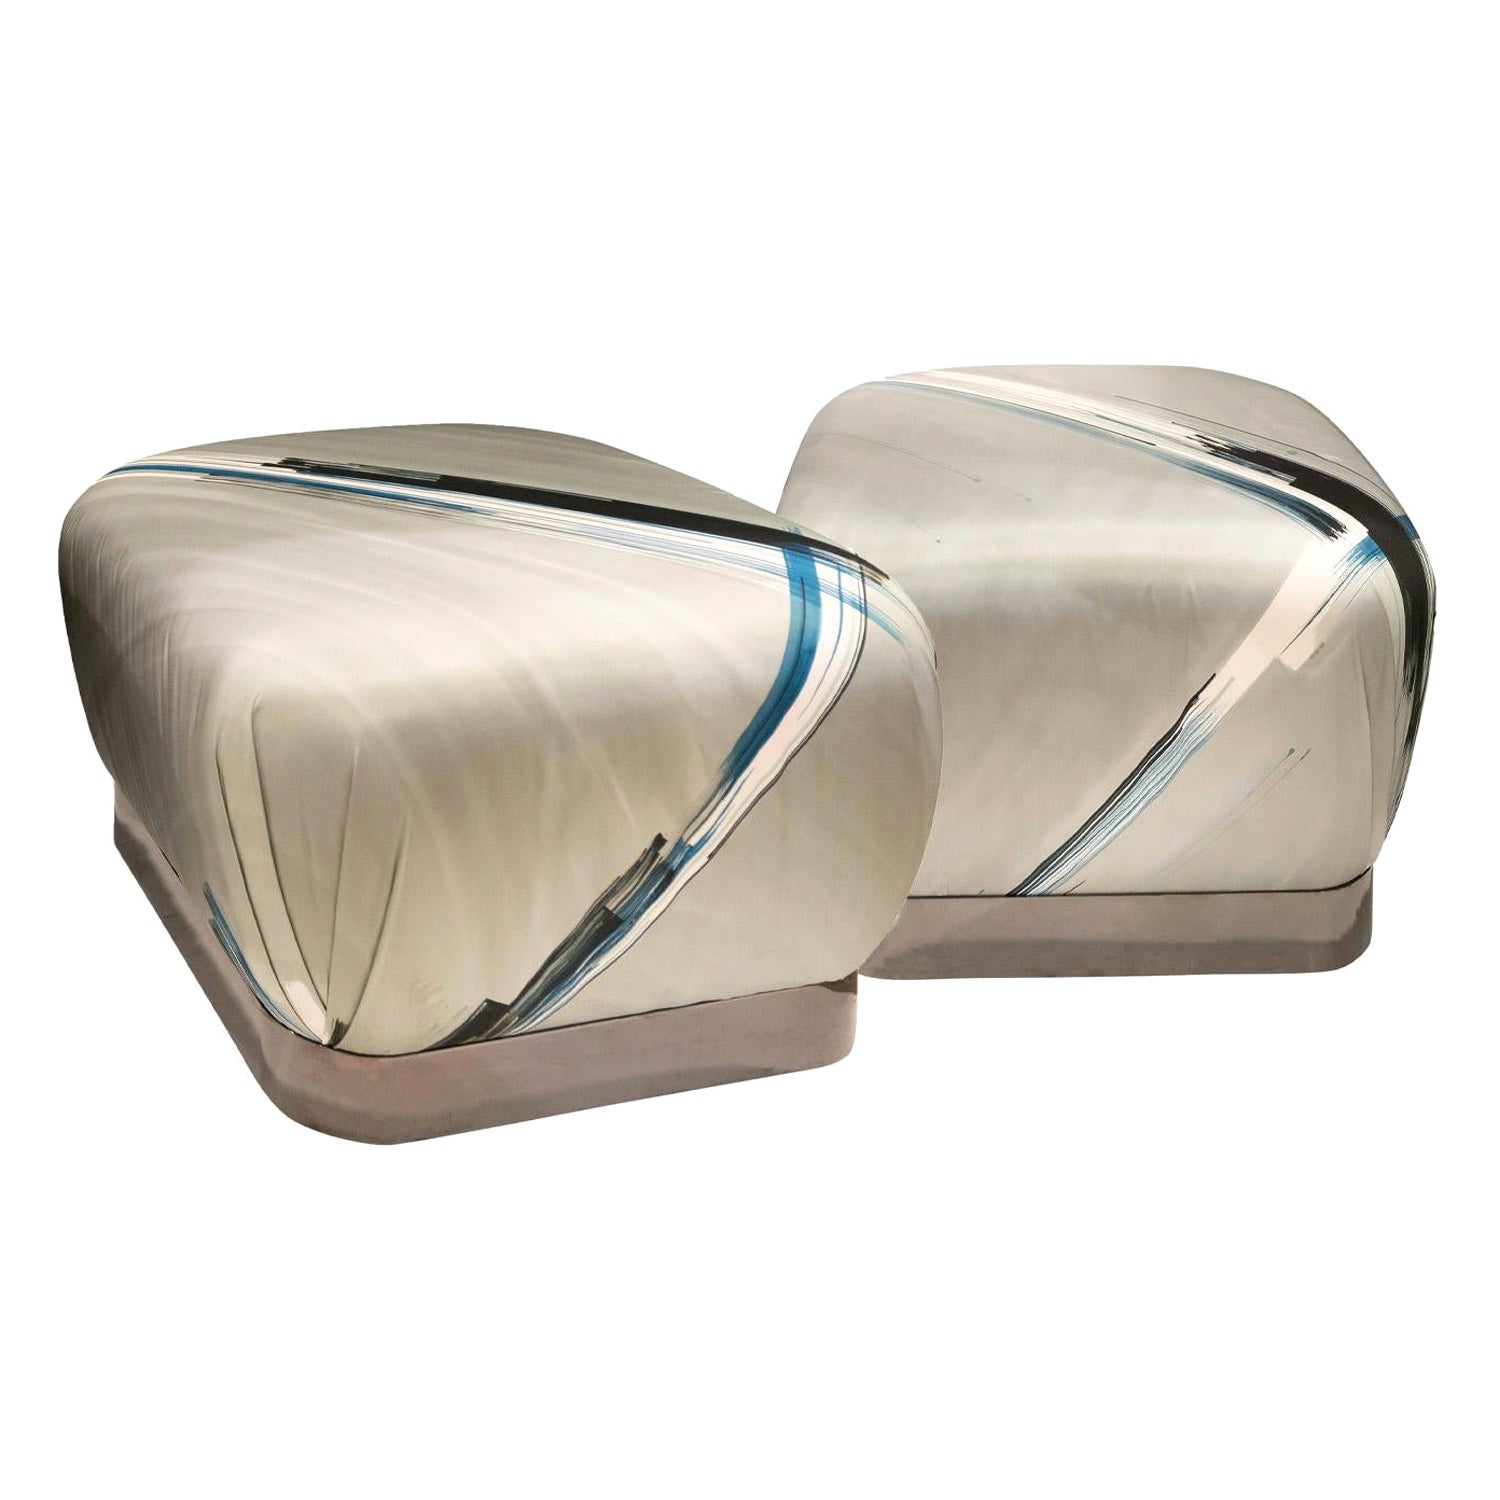 Karl Springer Pair of "Souffle Ottomans" with Polished Gunmetal Bases, 1970s For Sale